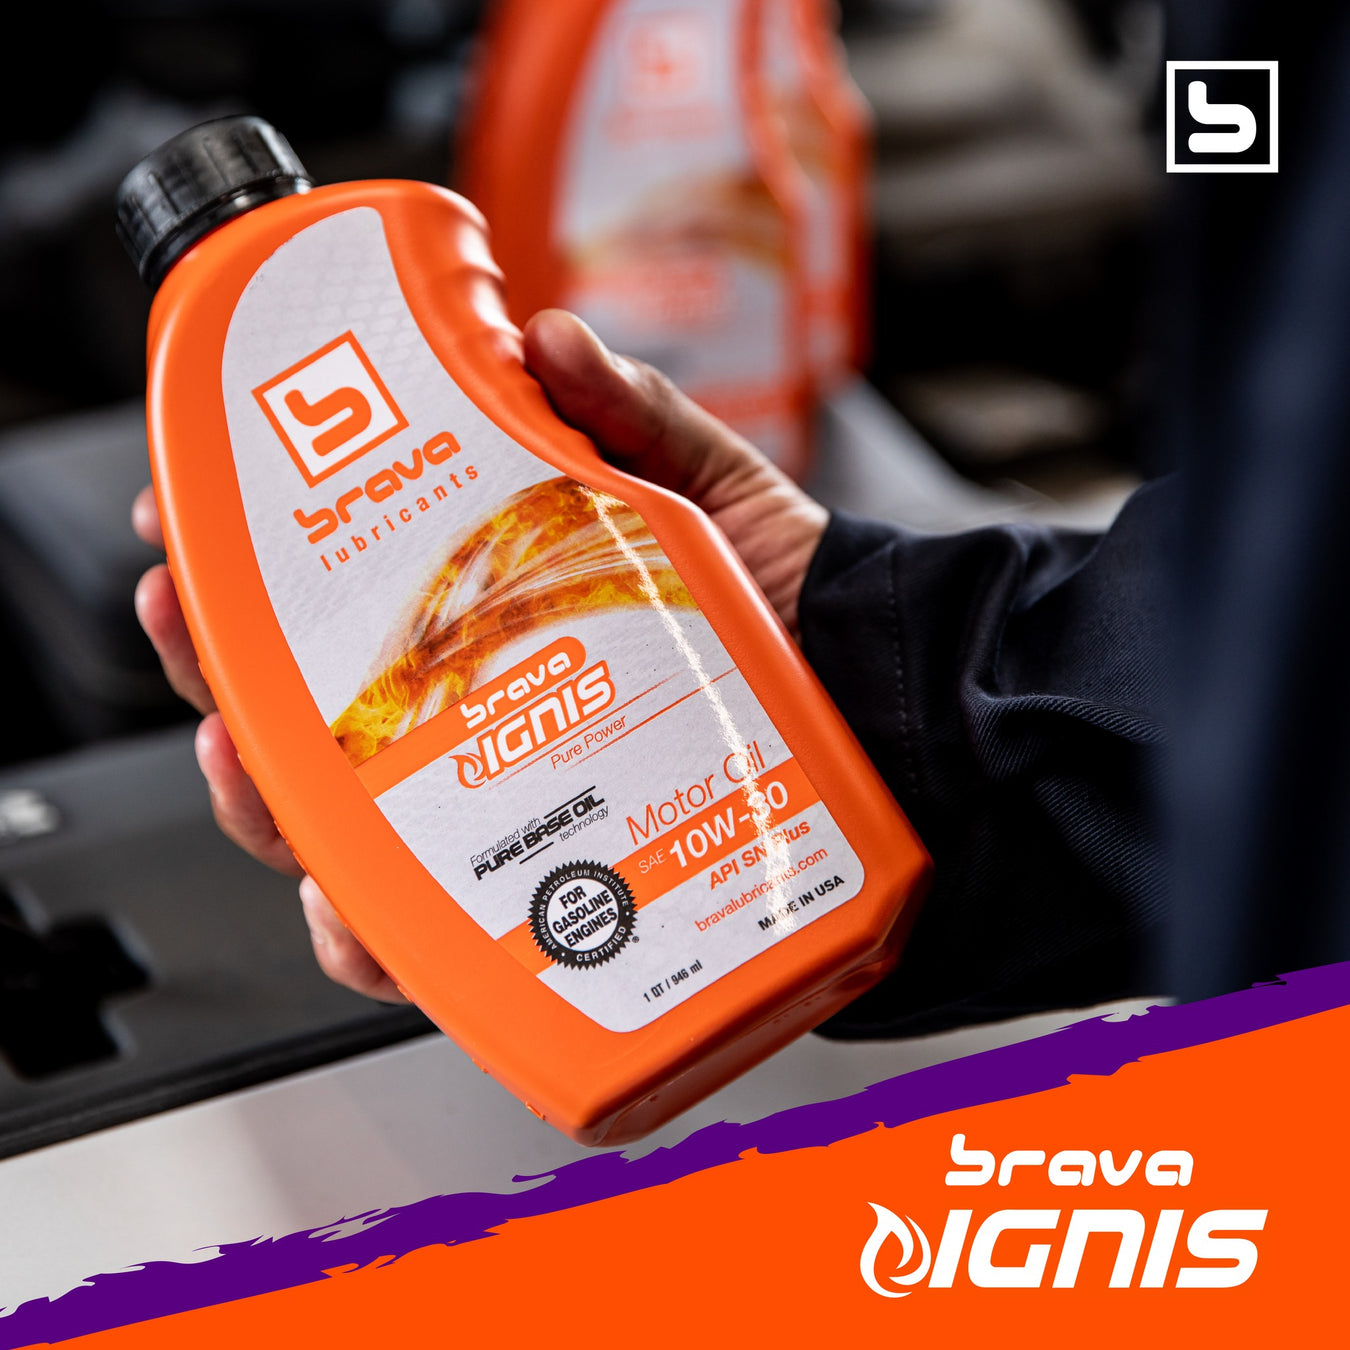 Brava Lubricants | Ignis. High quality, mineral oil!